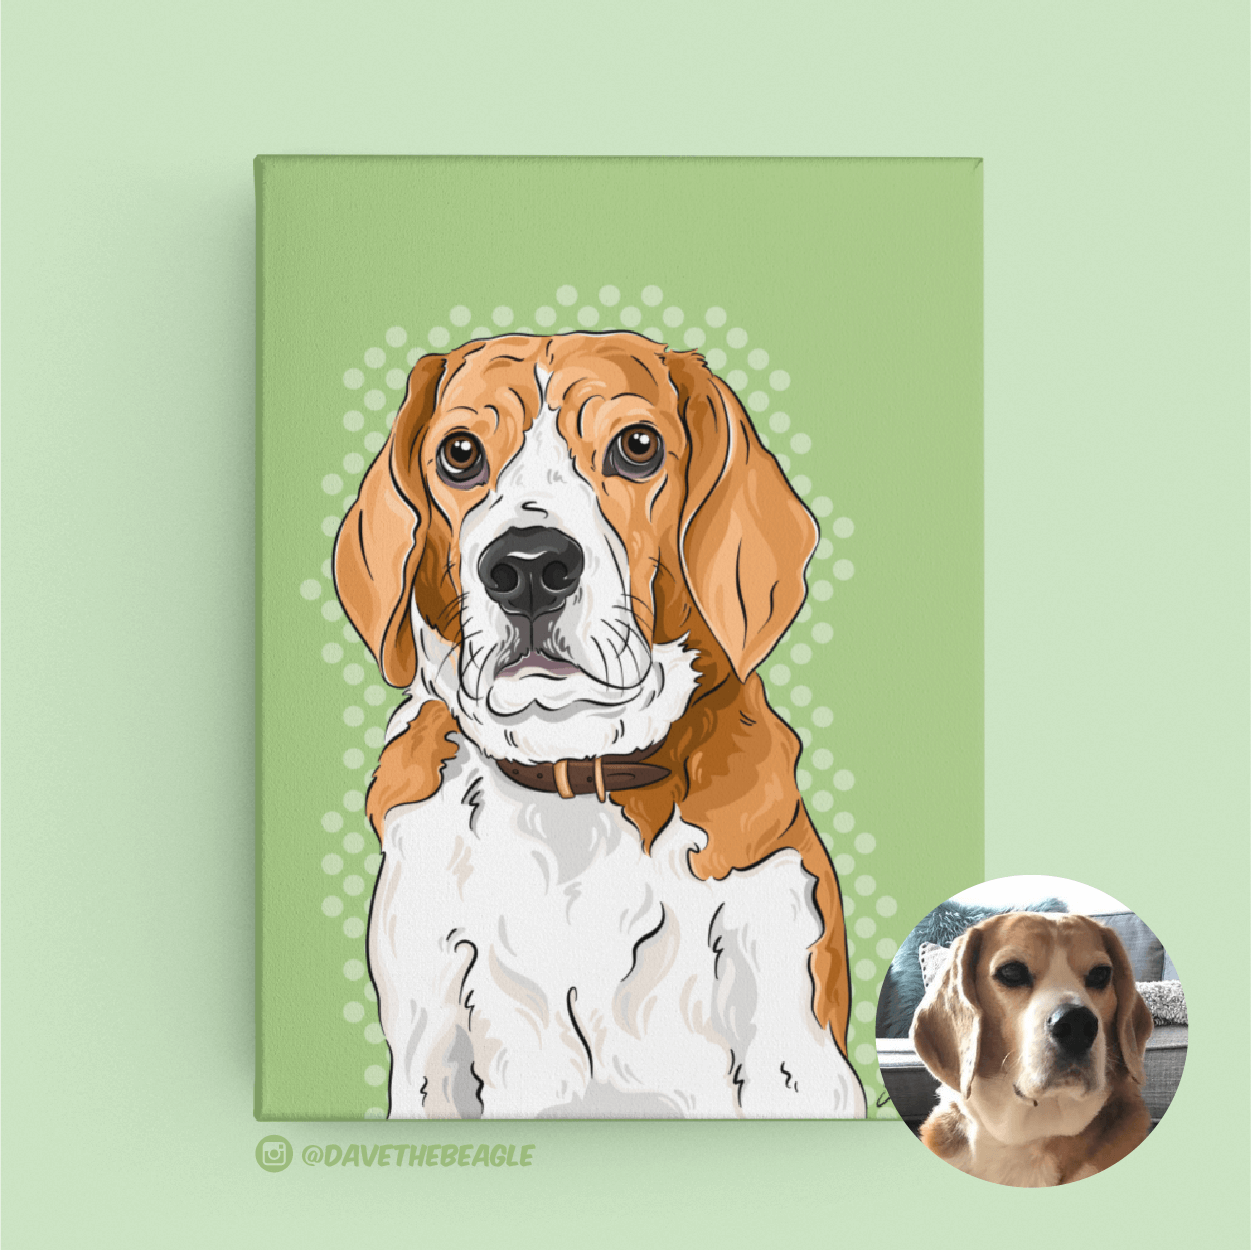 FOX HOUND AT ATTENTION PORTRAIT PET DOG ANIMAL ART PAINTING PRINT ON REAL CANVAS 